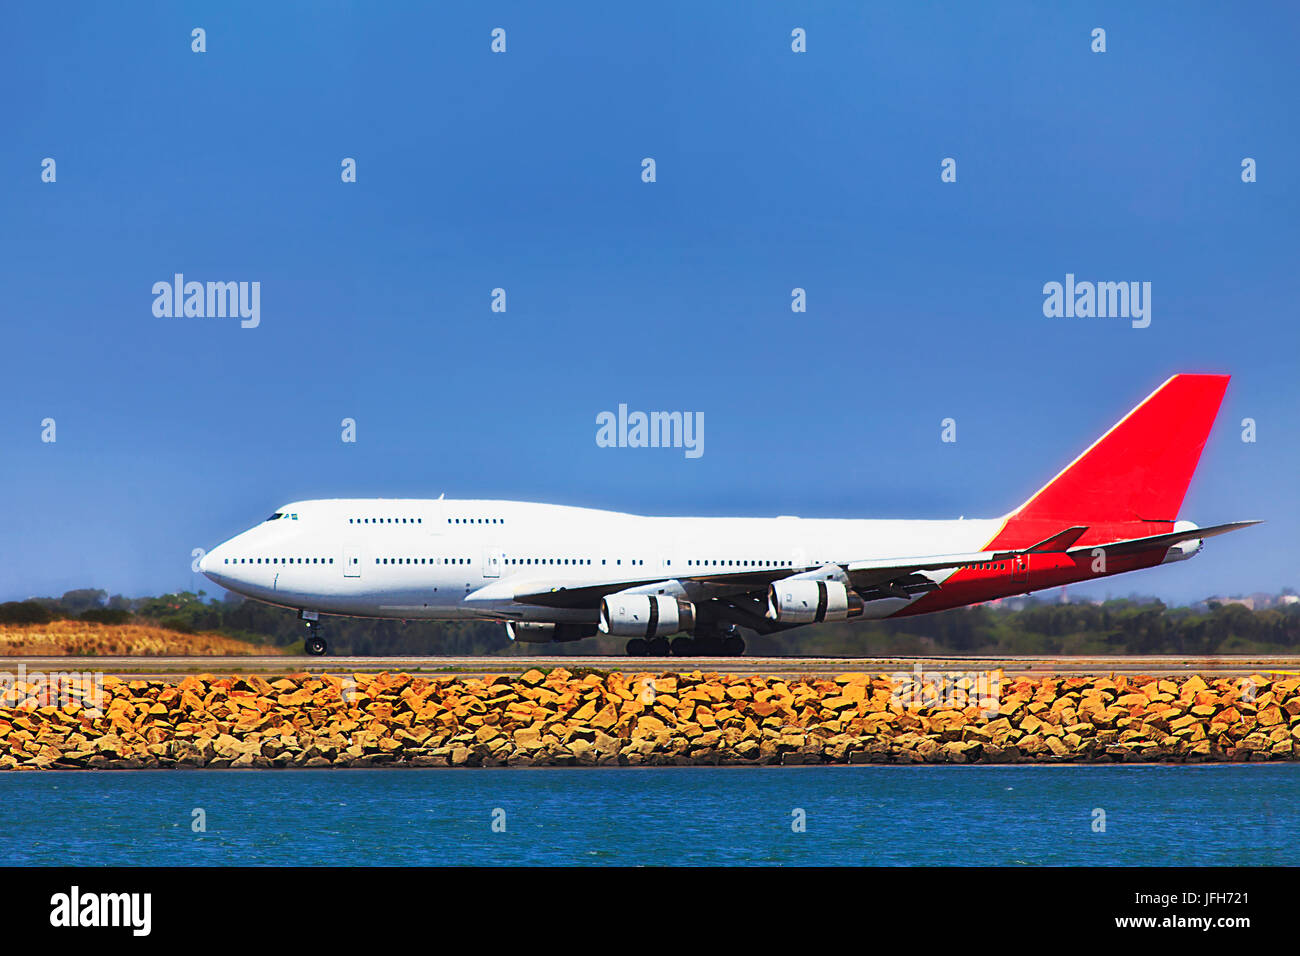 Double decker modern air jet taking off from Sydney internation airport runway on a bright sunny day under blue clear sky. Stock Photo